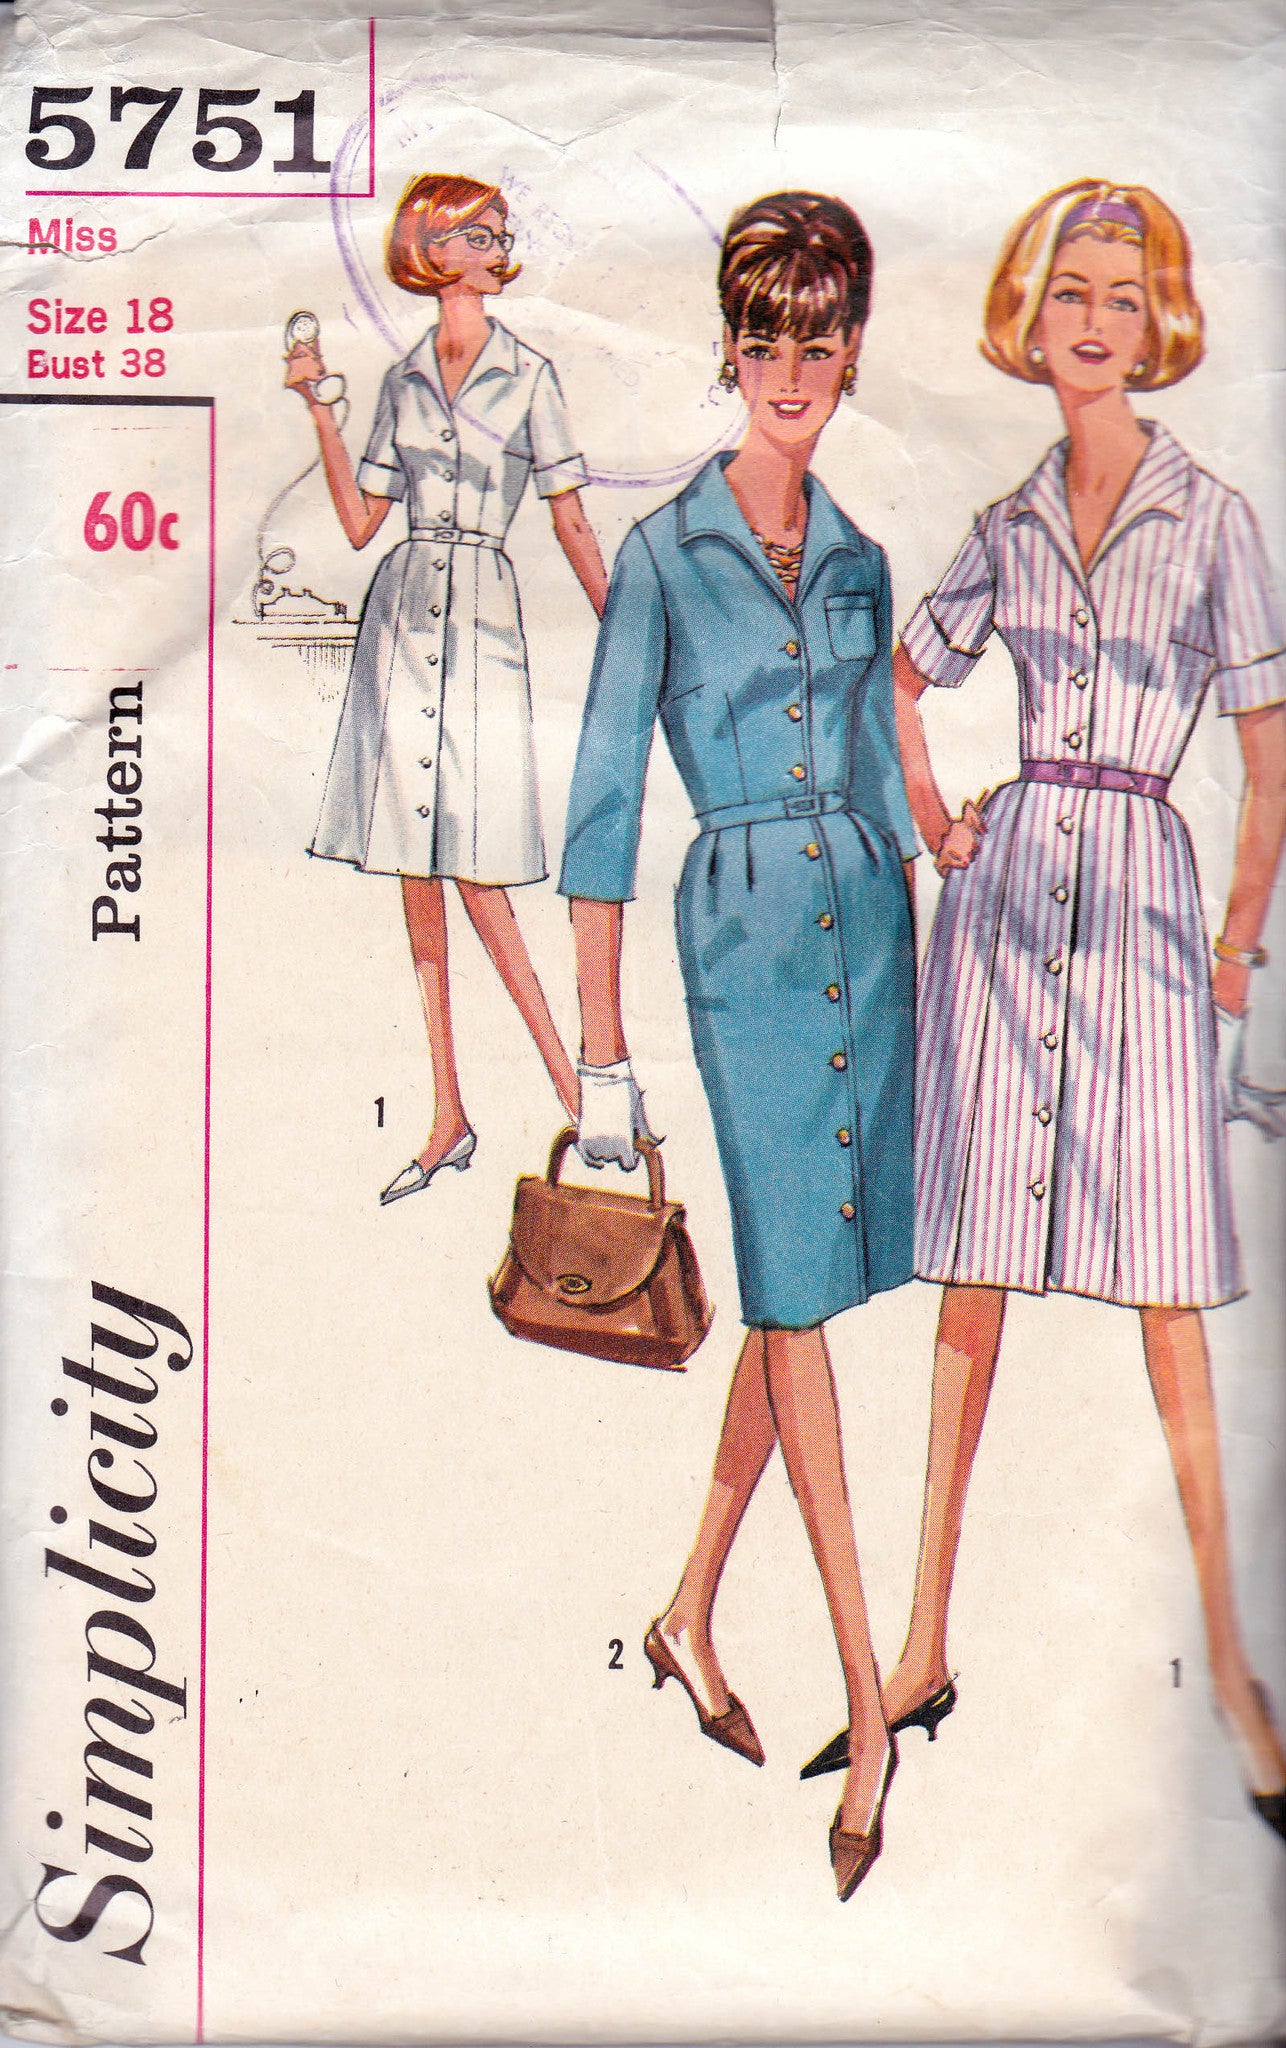 Simplicity 5751 Womens Retro Plus Size Shirtdress 1960s Vintage Sewing Pattern Size 18 Bust 38 Inches UNUSED Factory Folded